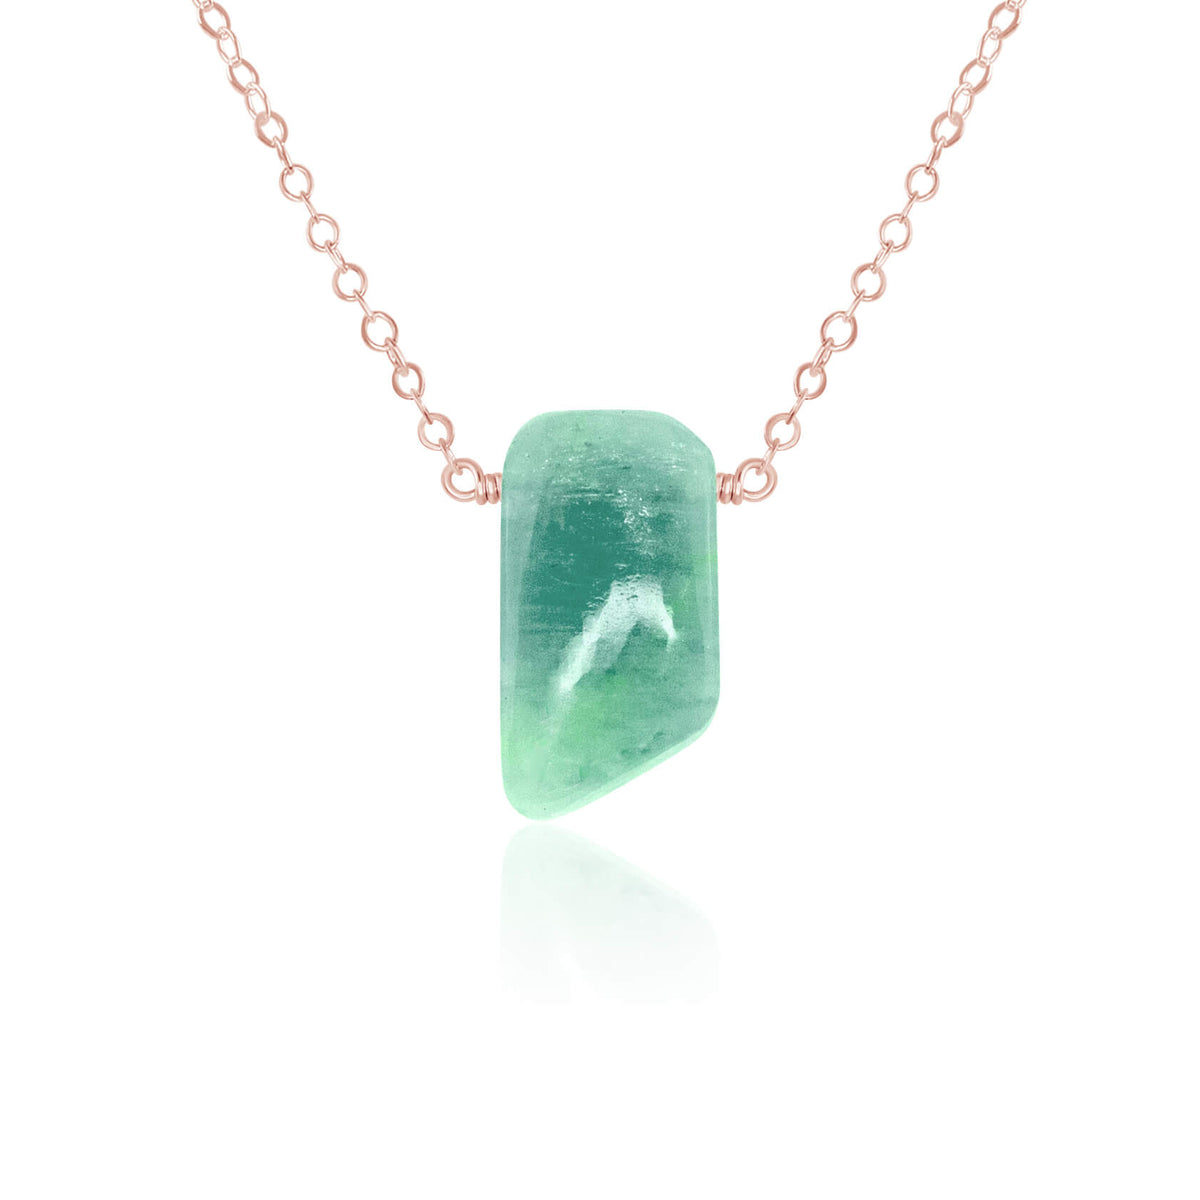 Small Smooth Slab Point Necklace - Amazonite - 14K Rose Gold Fill - Luna Tide Handmade Jewellery